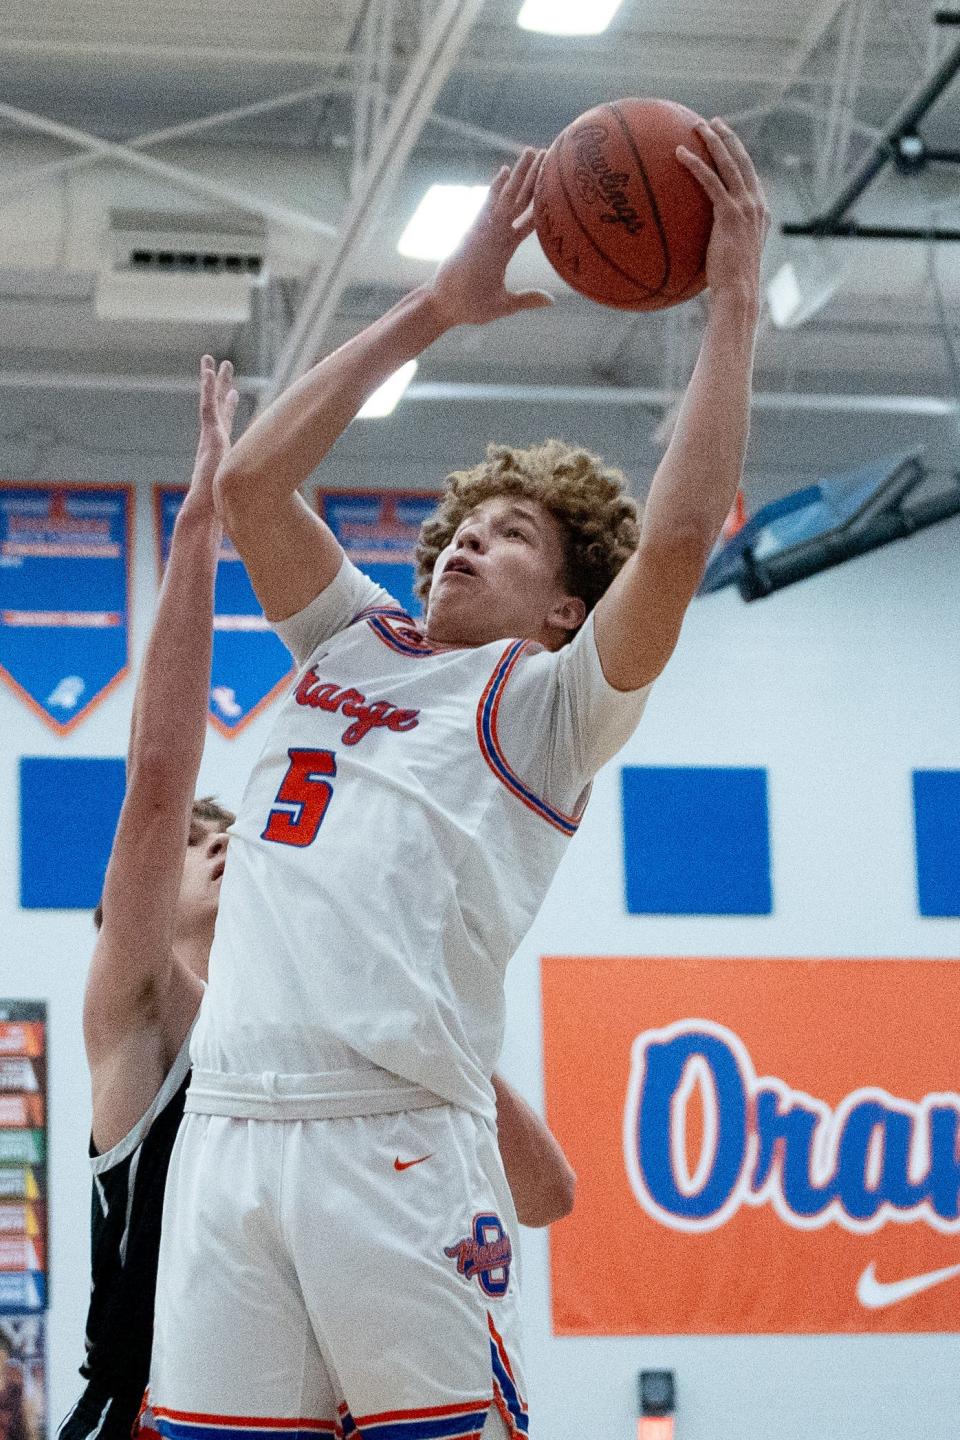 Olentangy Orange's Devin Brown made the winning free throws in two two-point wins last week, keeping his team undefeated.